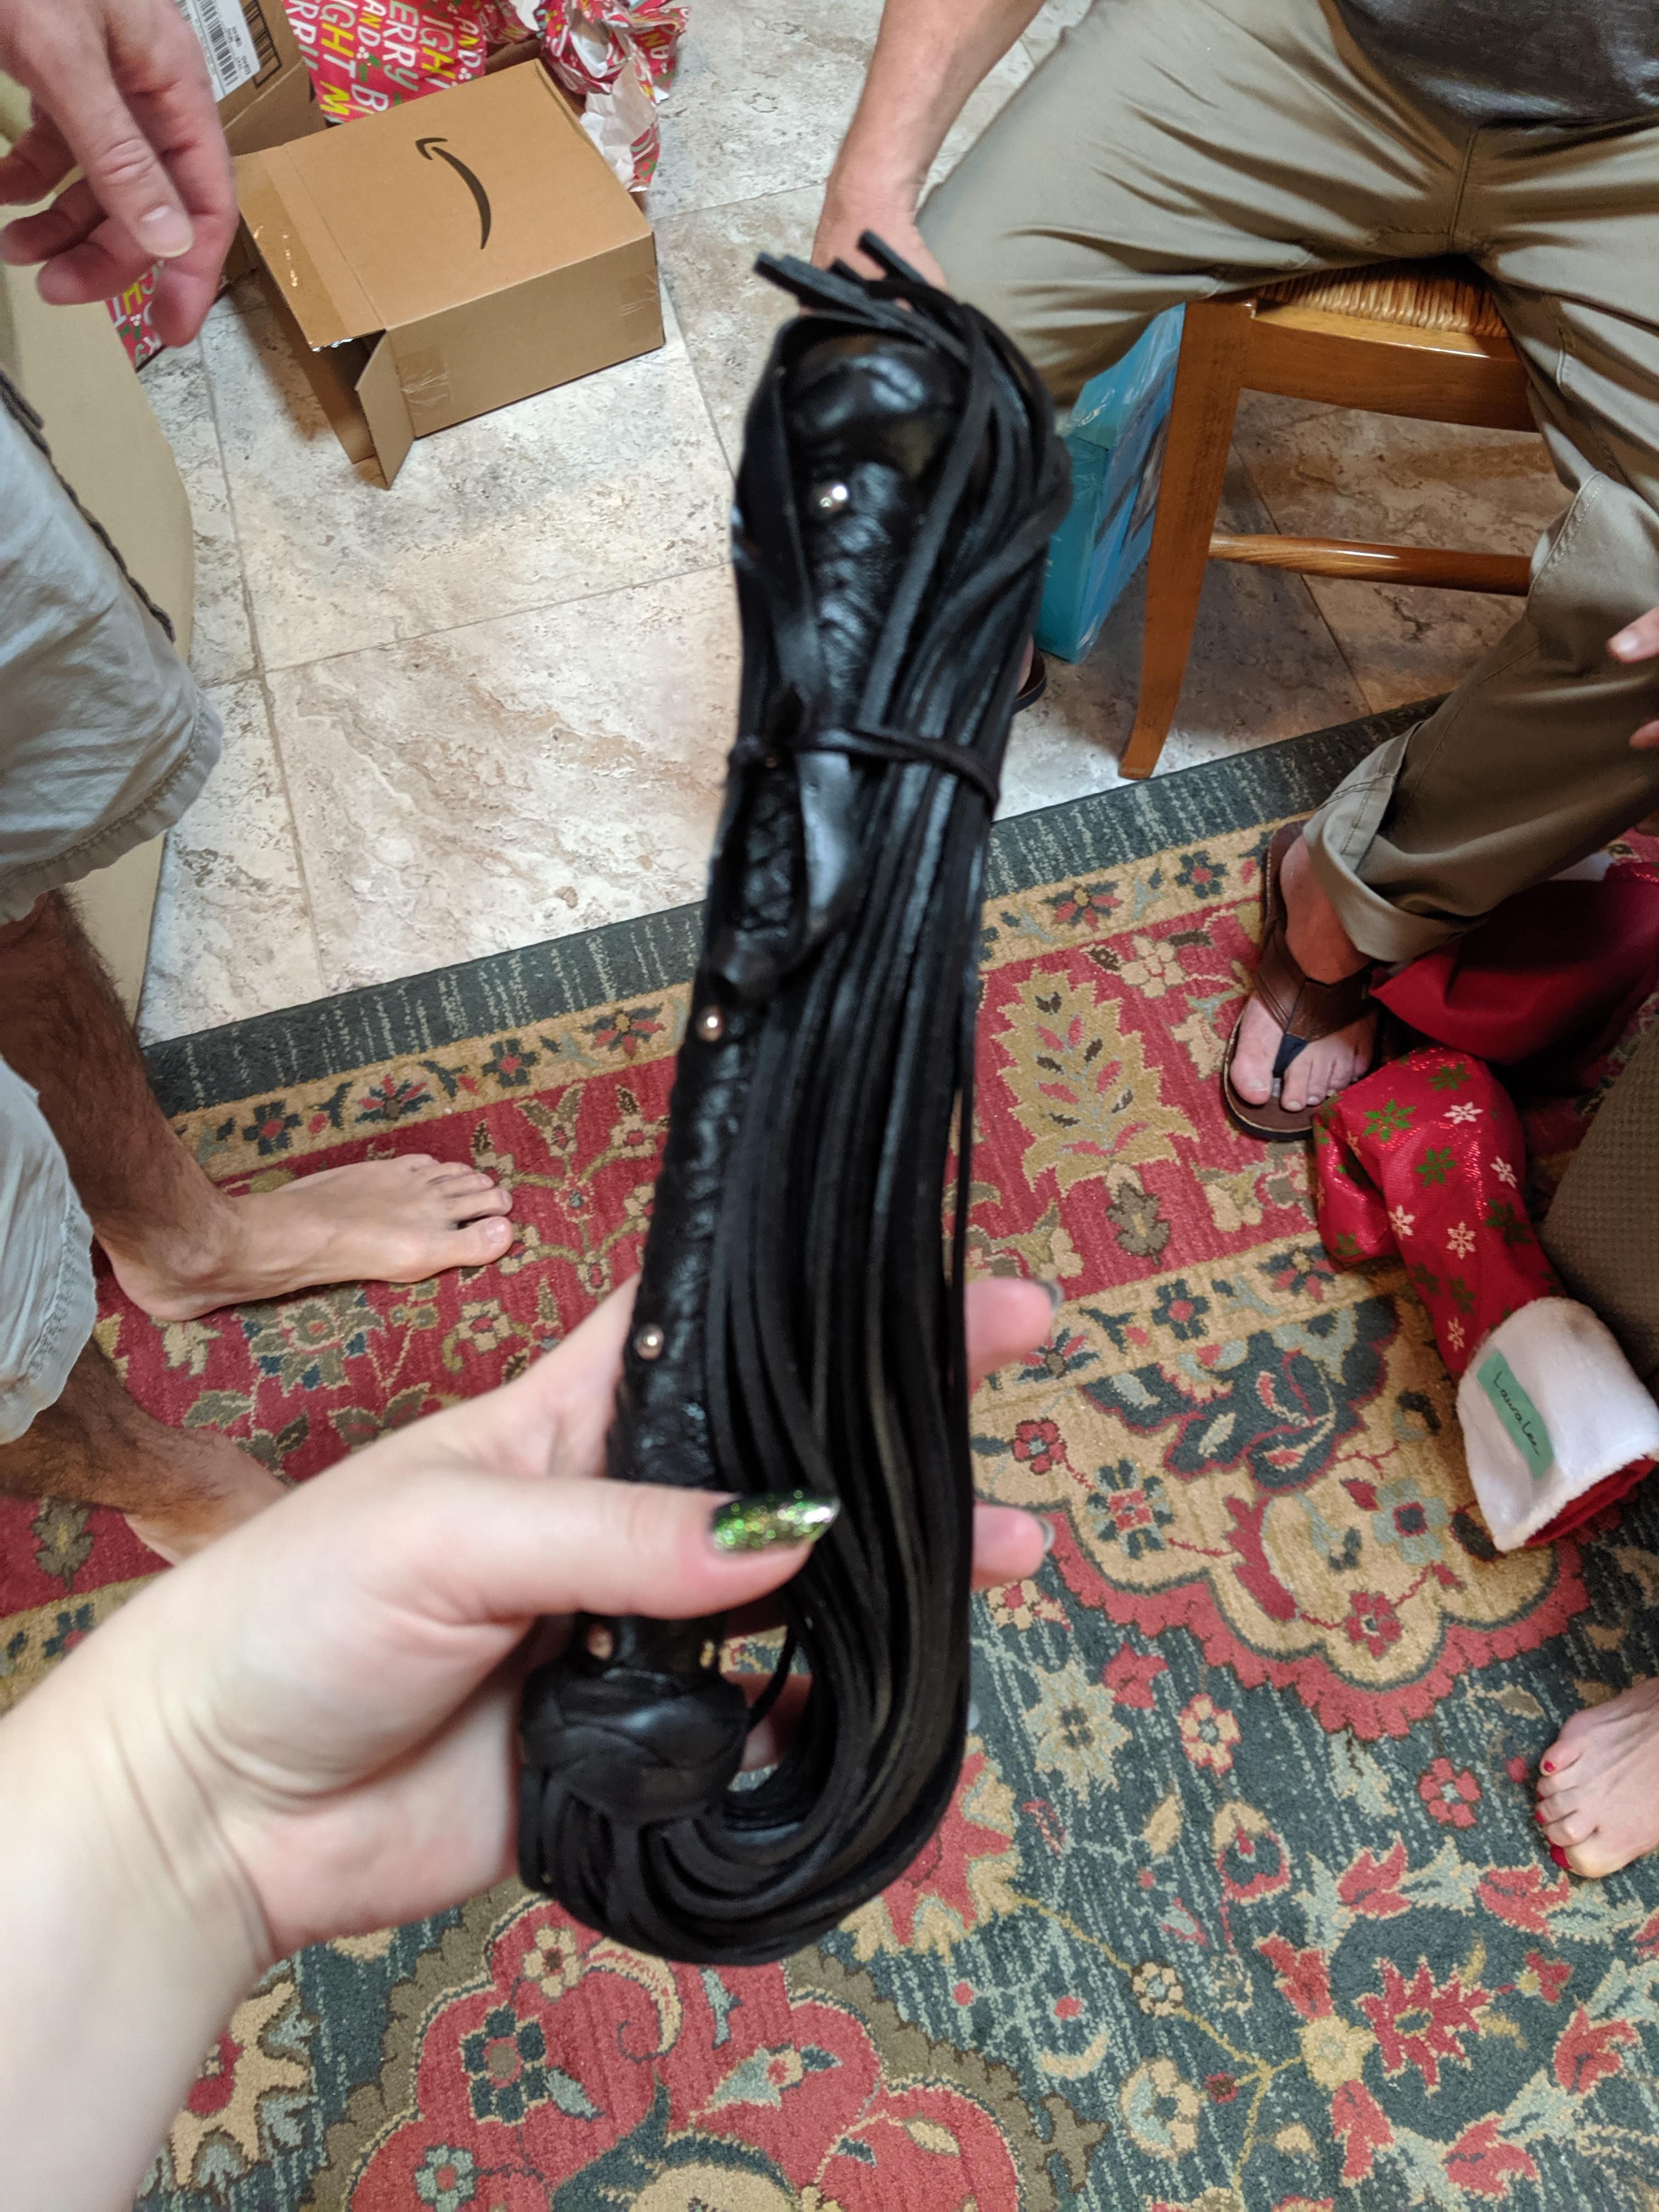 My 10 year old cousin asked for a riding crop for her horseback riding lessons, my aunt tried to deliver...